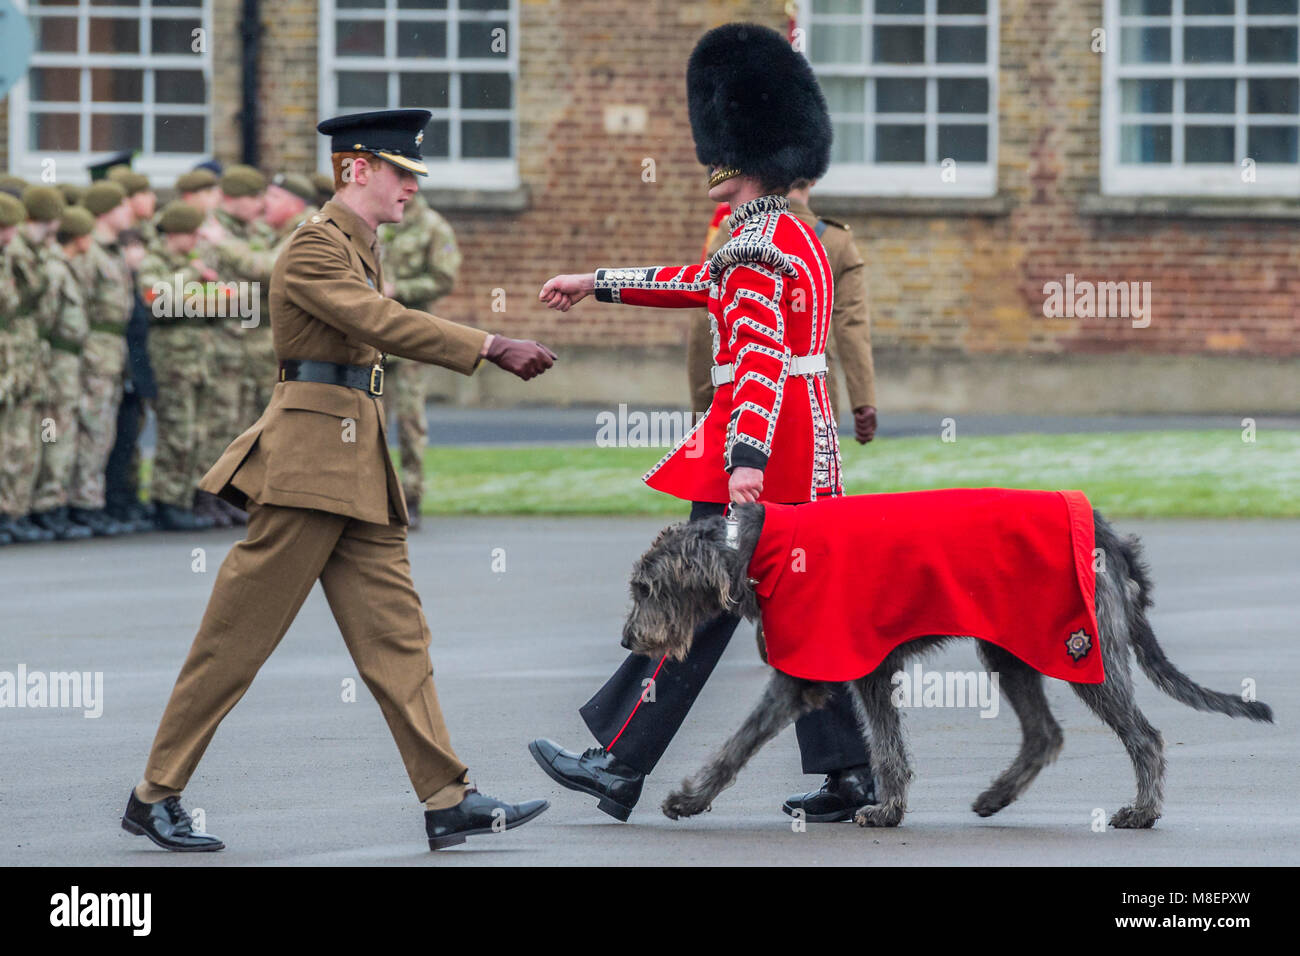 London, UK, 17 Mar 2018. Their mascot, the Irish Wolfhound Domhnal advances to recieve his shamrock - The Duke of Cambridge, Colonel of the Irish Guards, accompanied by The Duchess of Cambridge, visited the 1st Battalion Irish Guards at their St. Patrick's Day Parade. Credit: Guy Bell/Alamy Live News Stock Photo